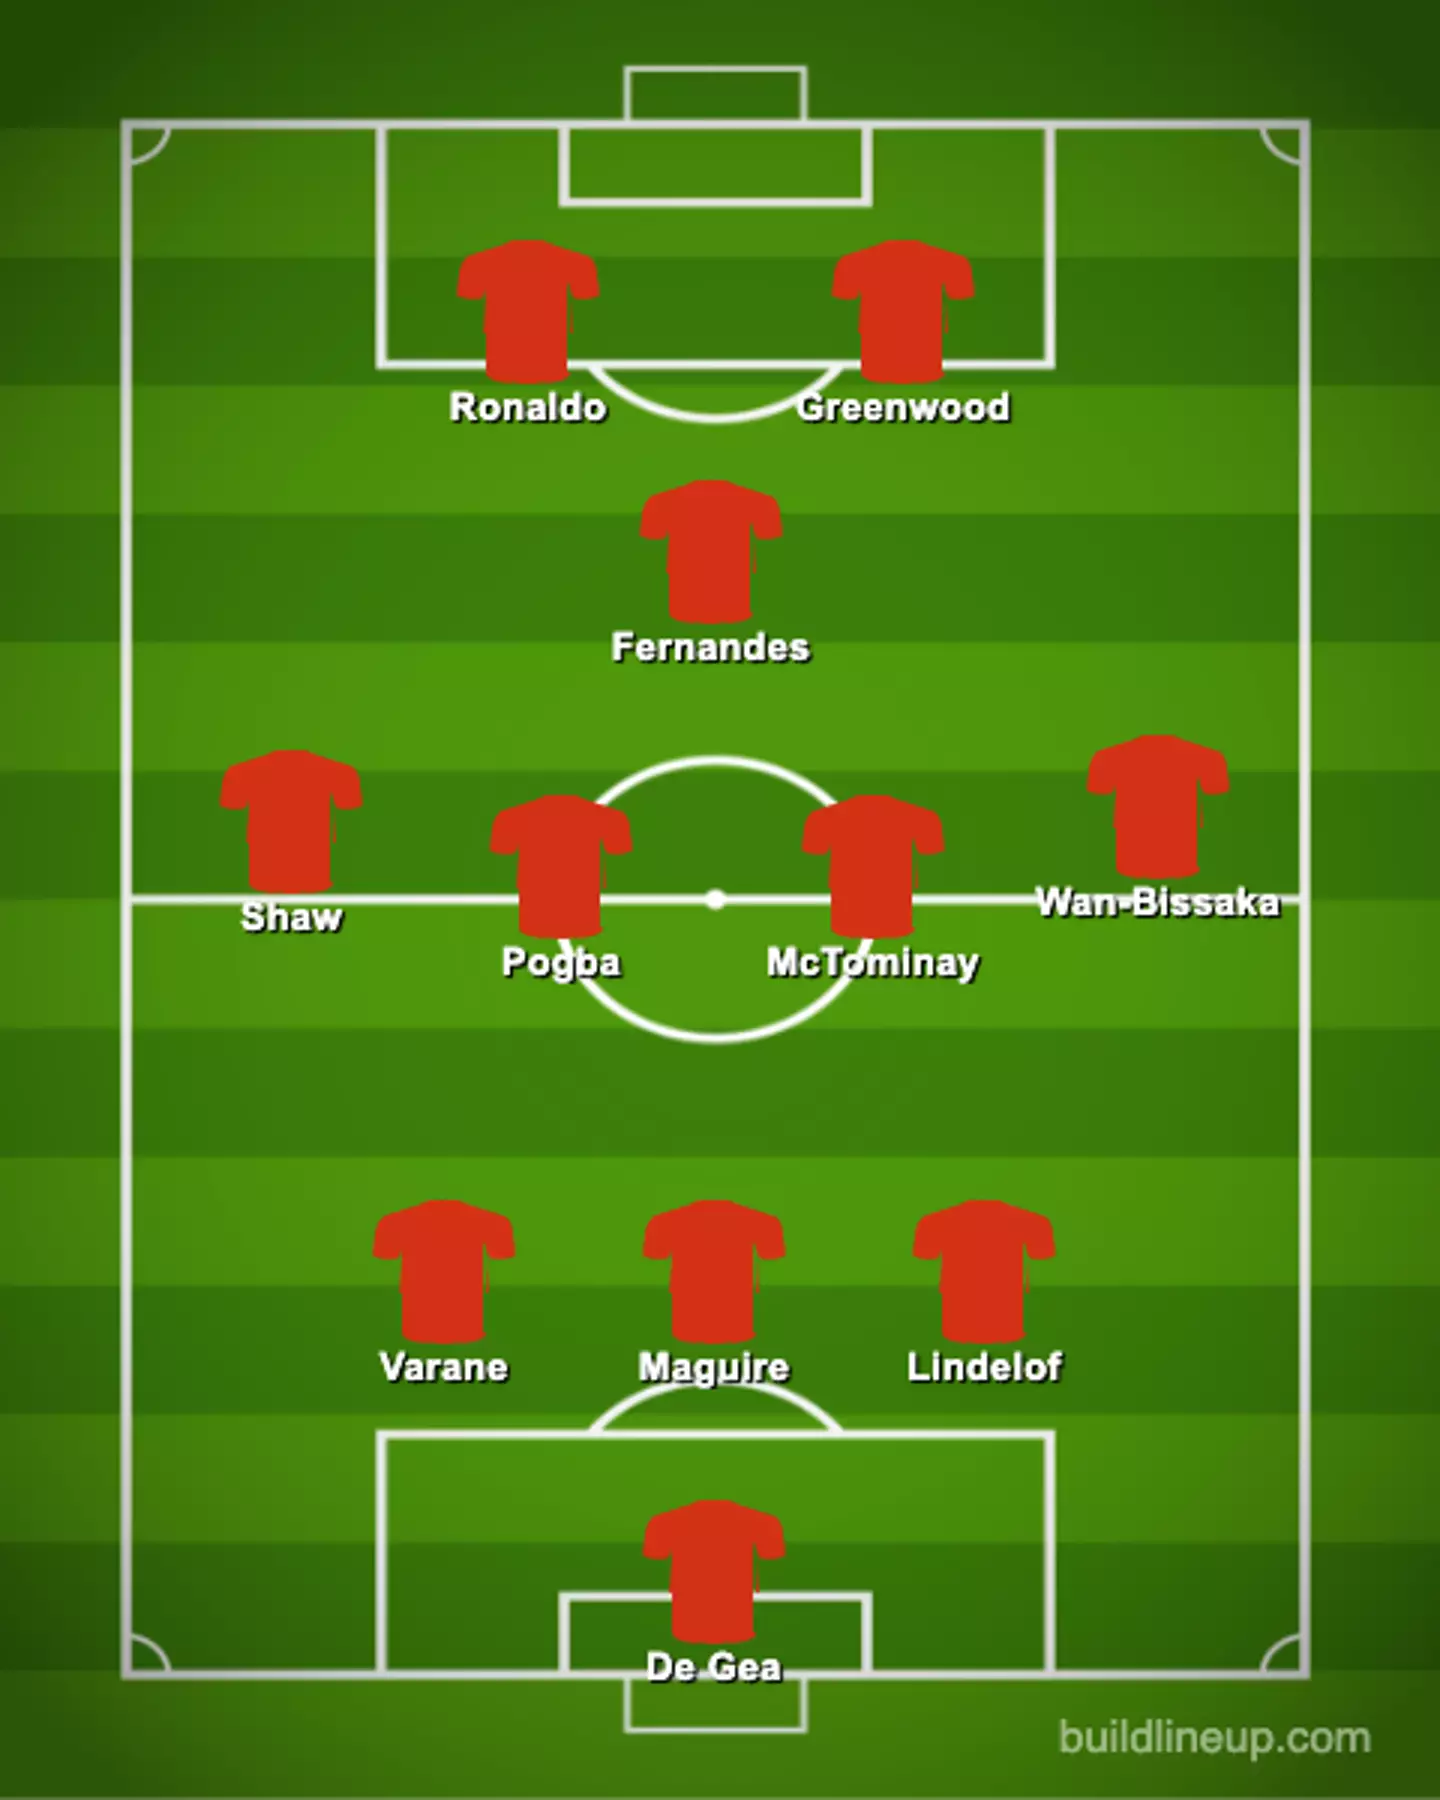 How Ronaldo would line up in a 3-4-1-2 formation